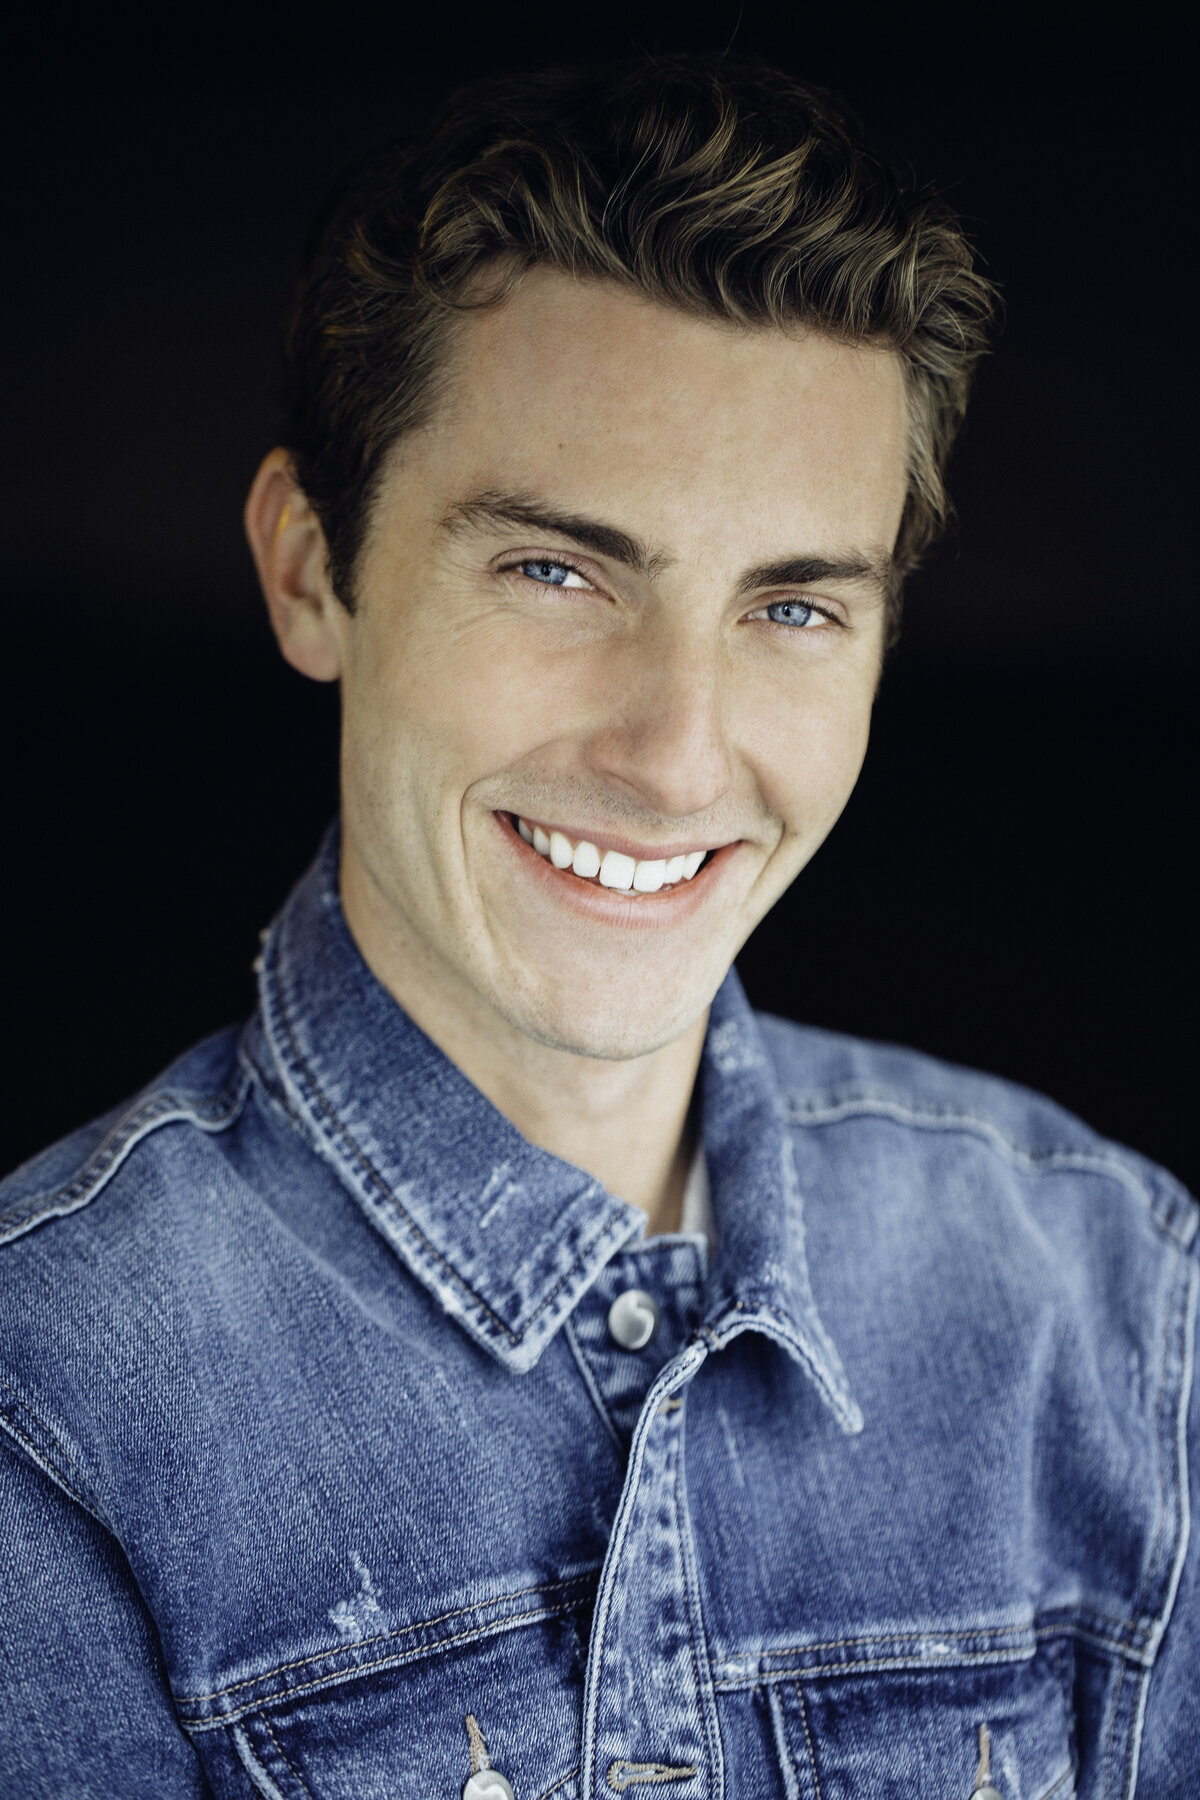 Headshot Photograph Of Young Man In Faded Blue Denim Jacket Los Angeles